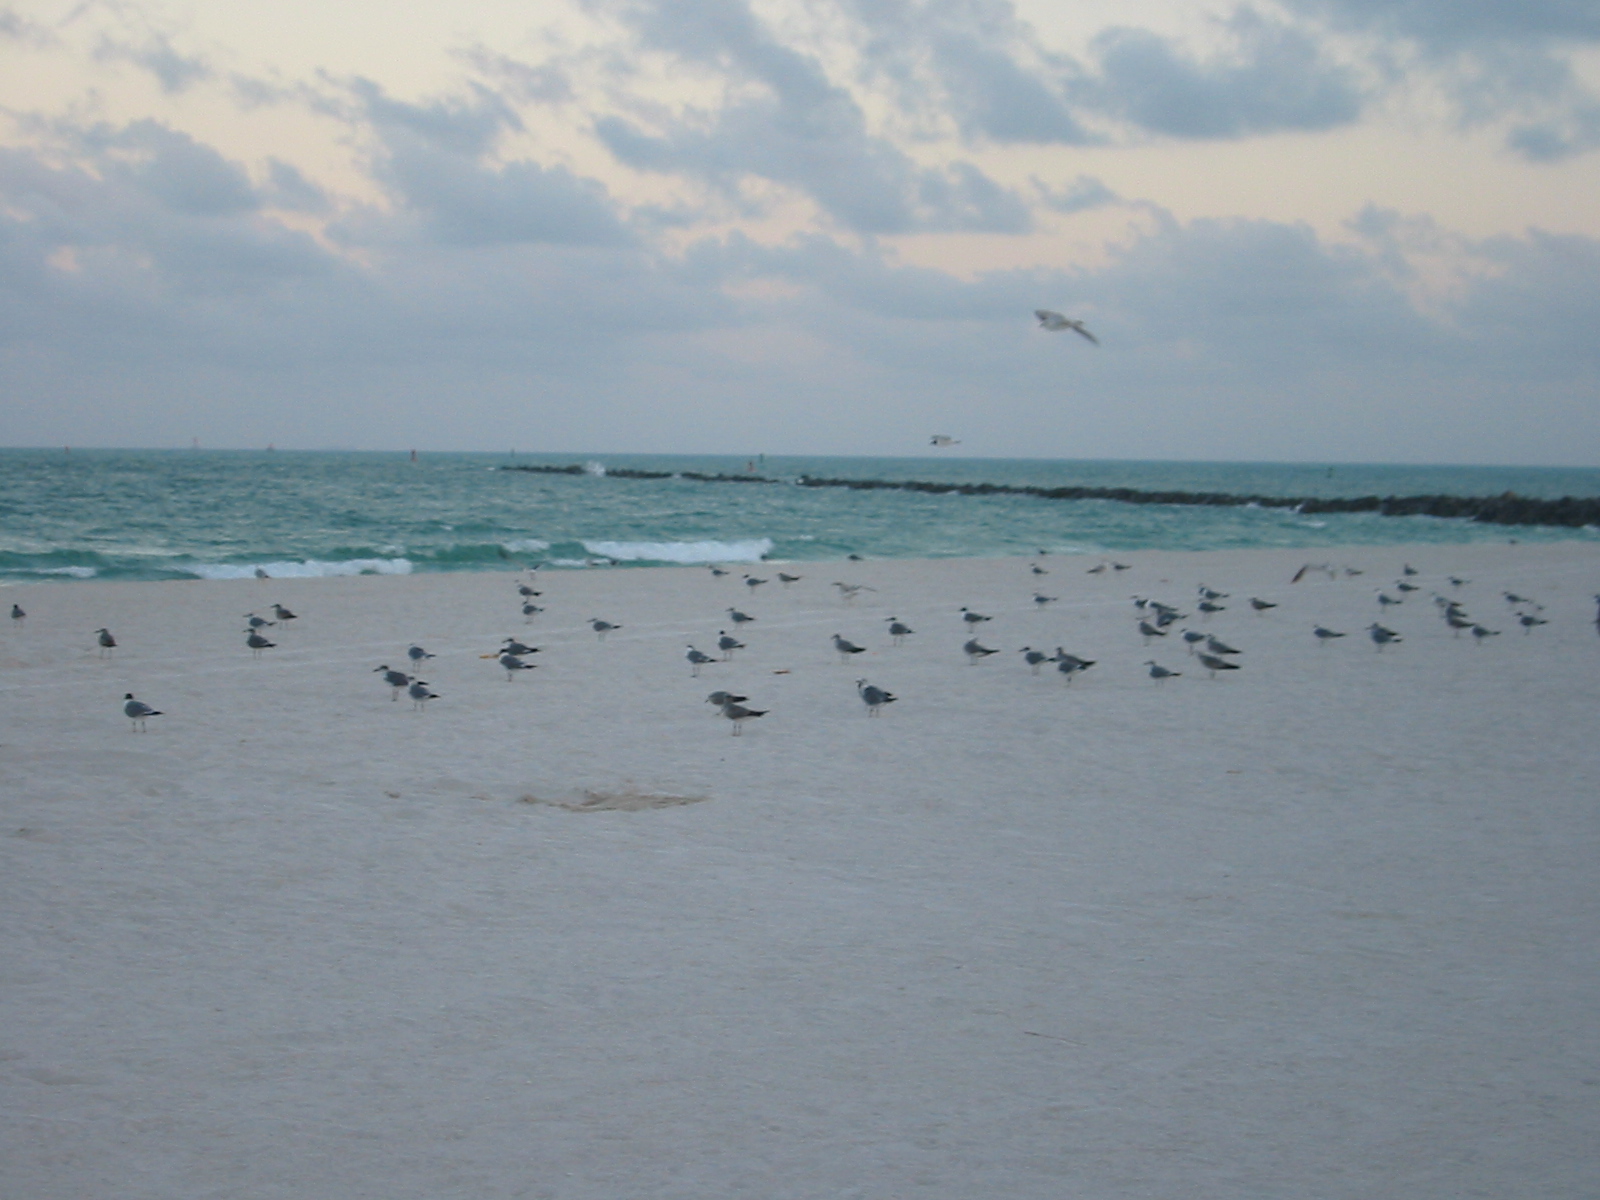 sea gulls on the beach flying over water